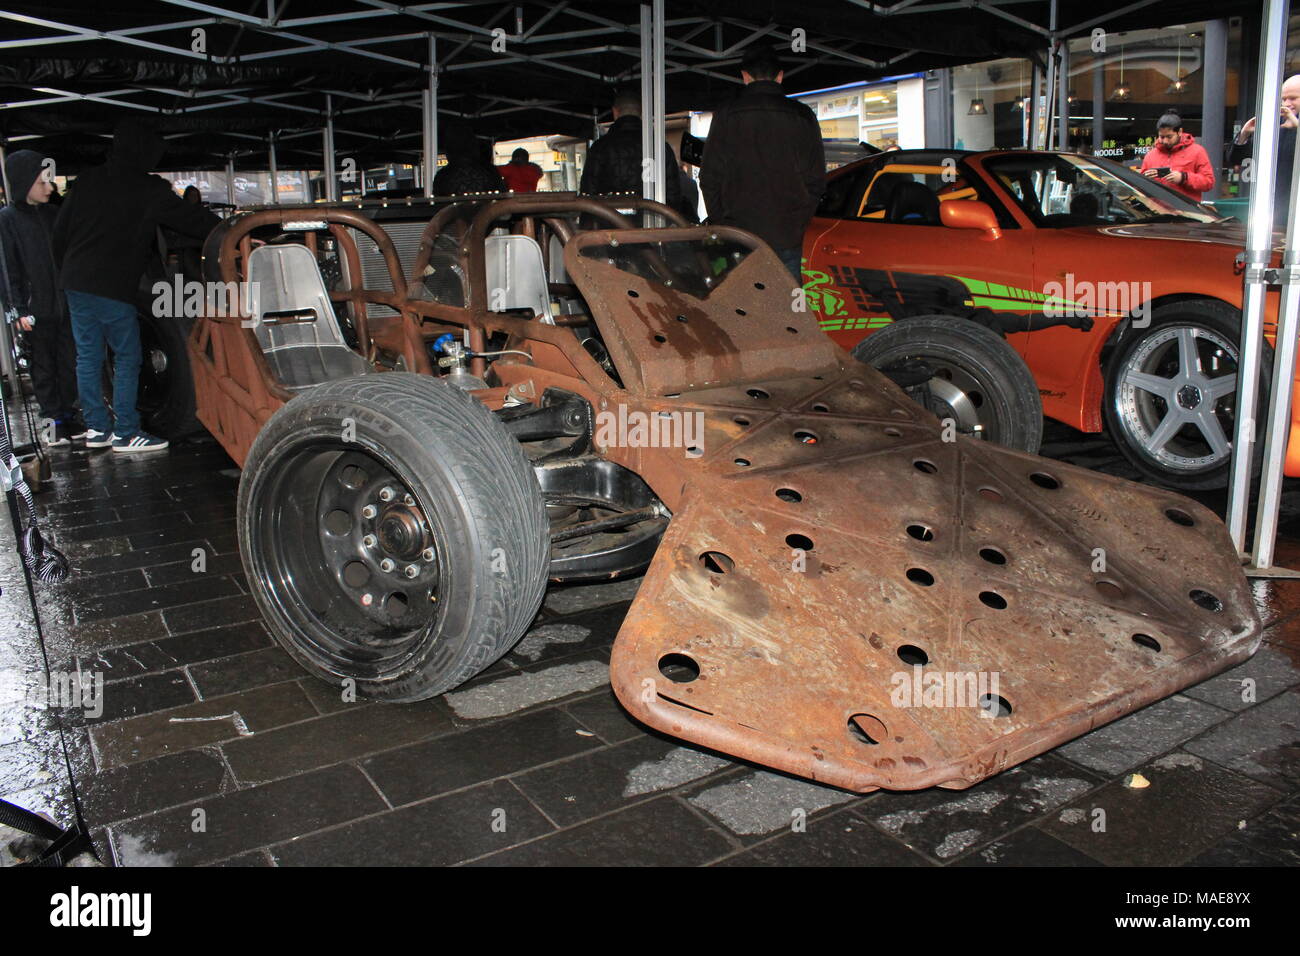 Fast & Furious Cars on Display before the start of UK Arena live shows. Newcastle, UK. 31st March, 2018. David Whinham/Alamy Live News Stock Photo